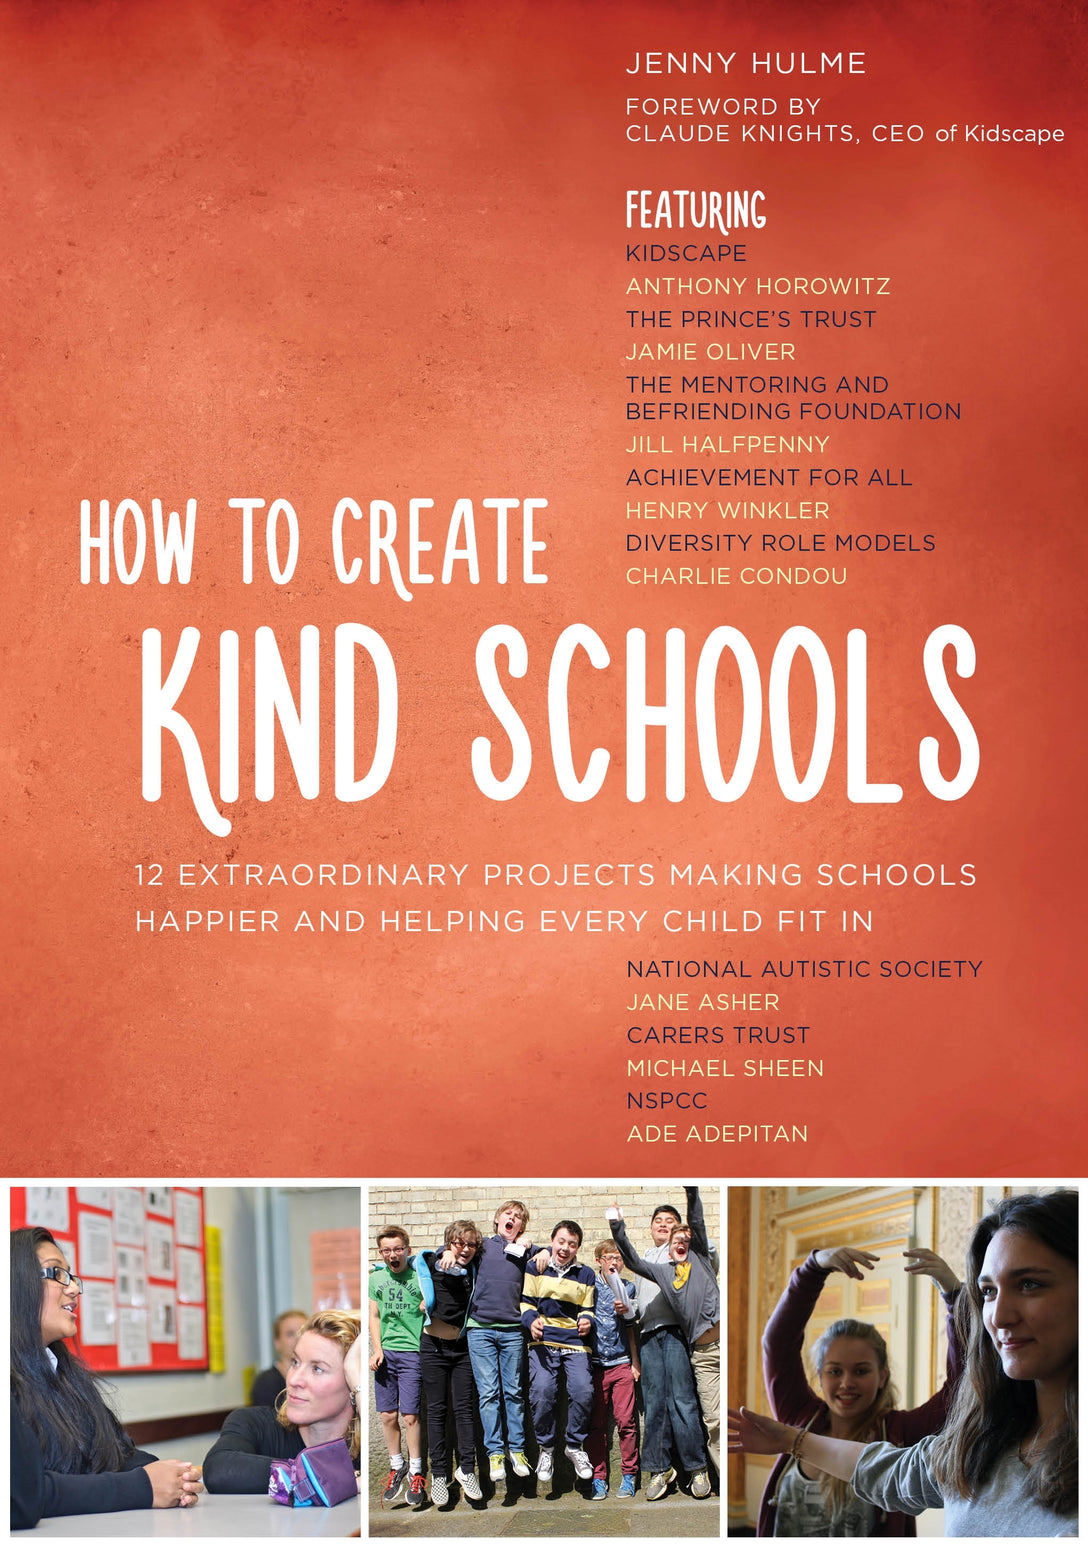 How to Create Kind Schools by Jenny Hulme, Claude Knights, CEO of Kidscape